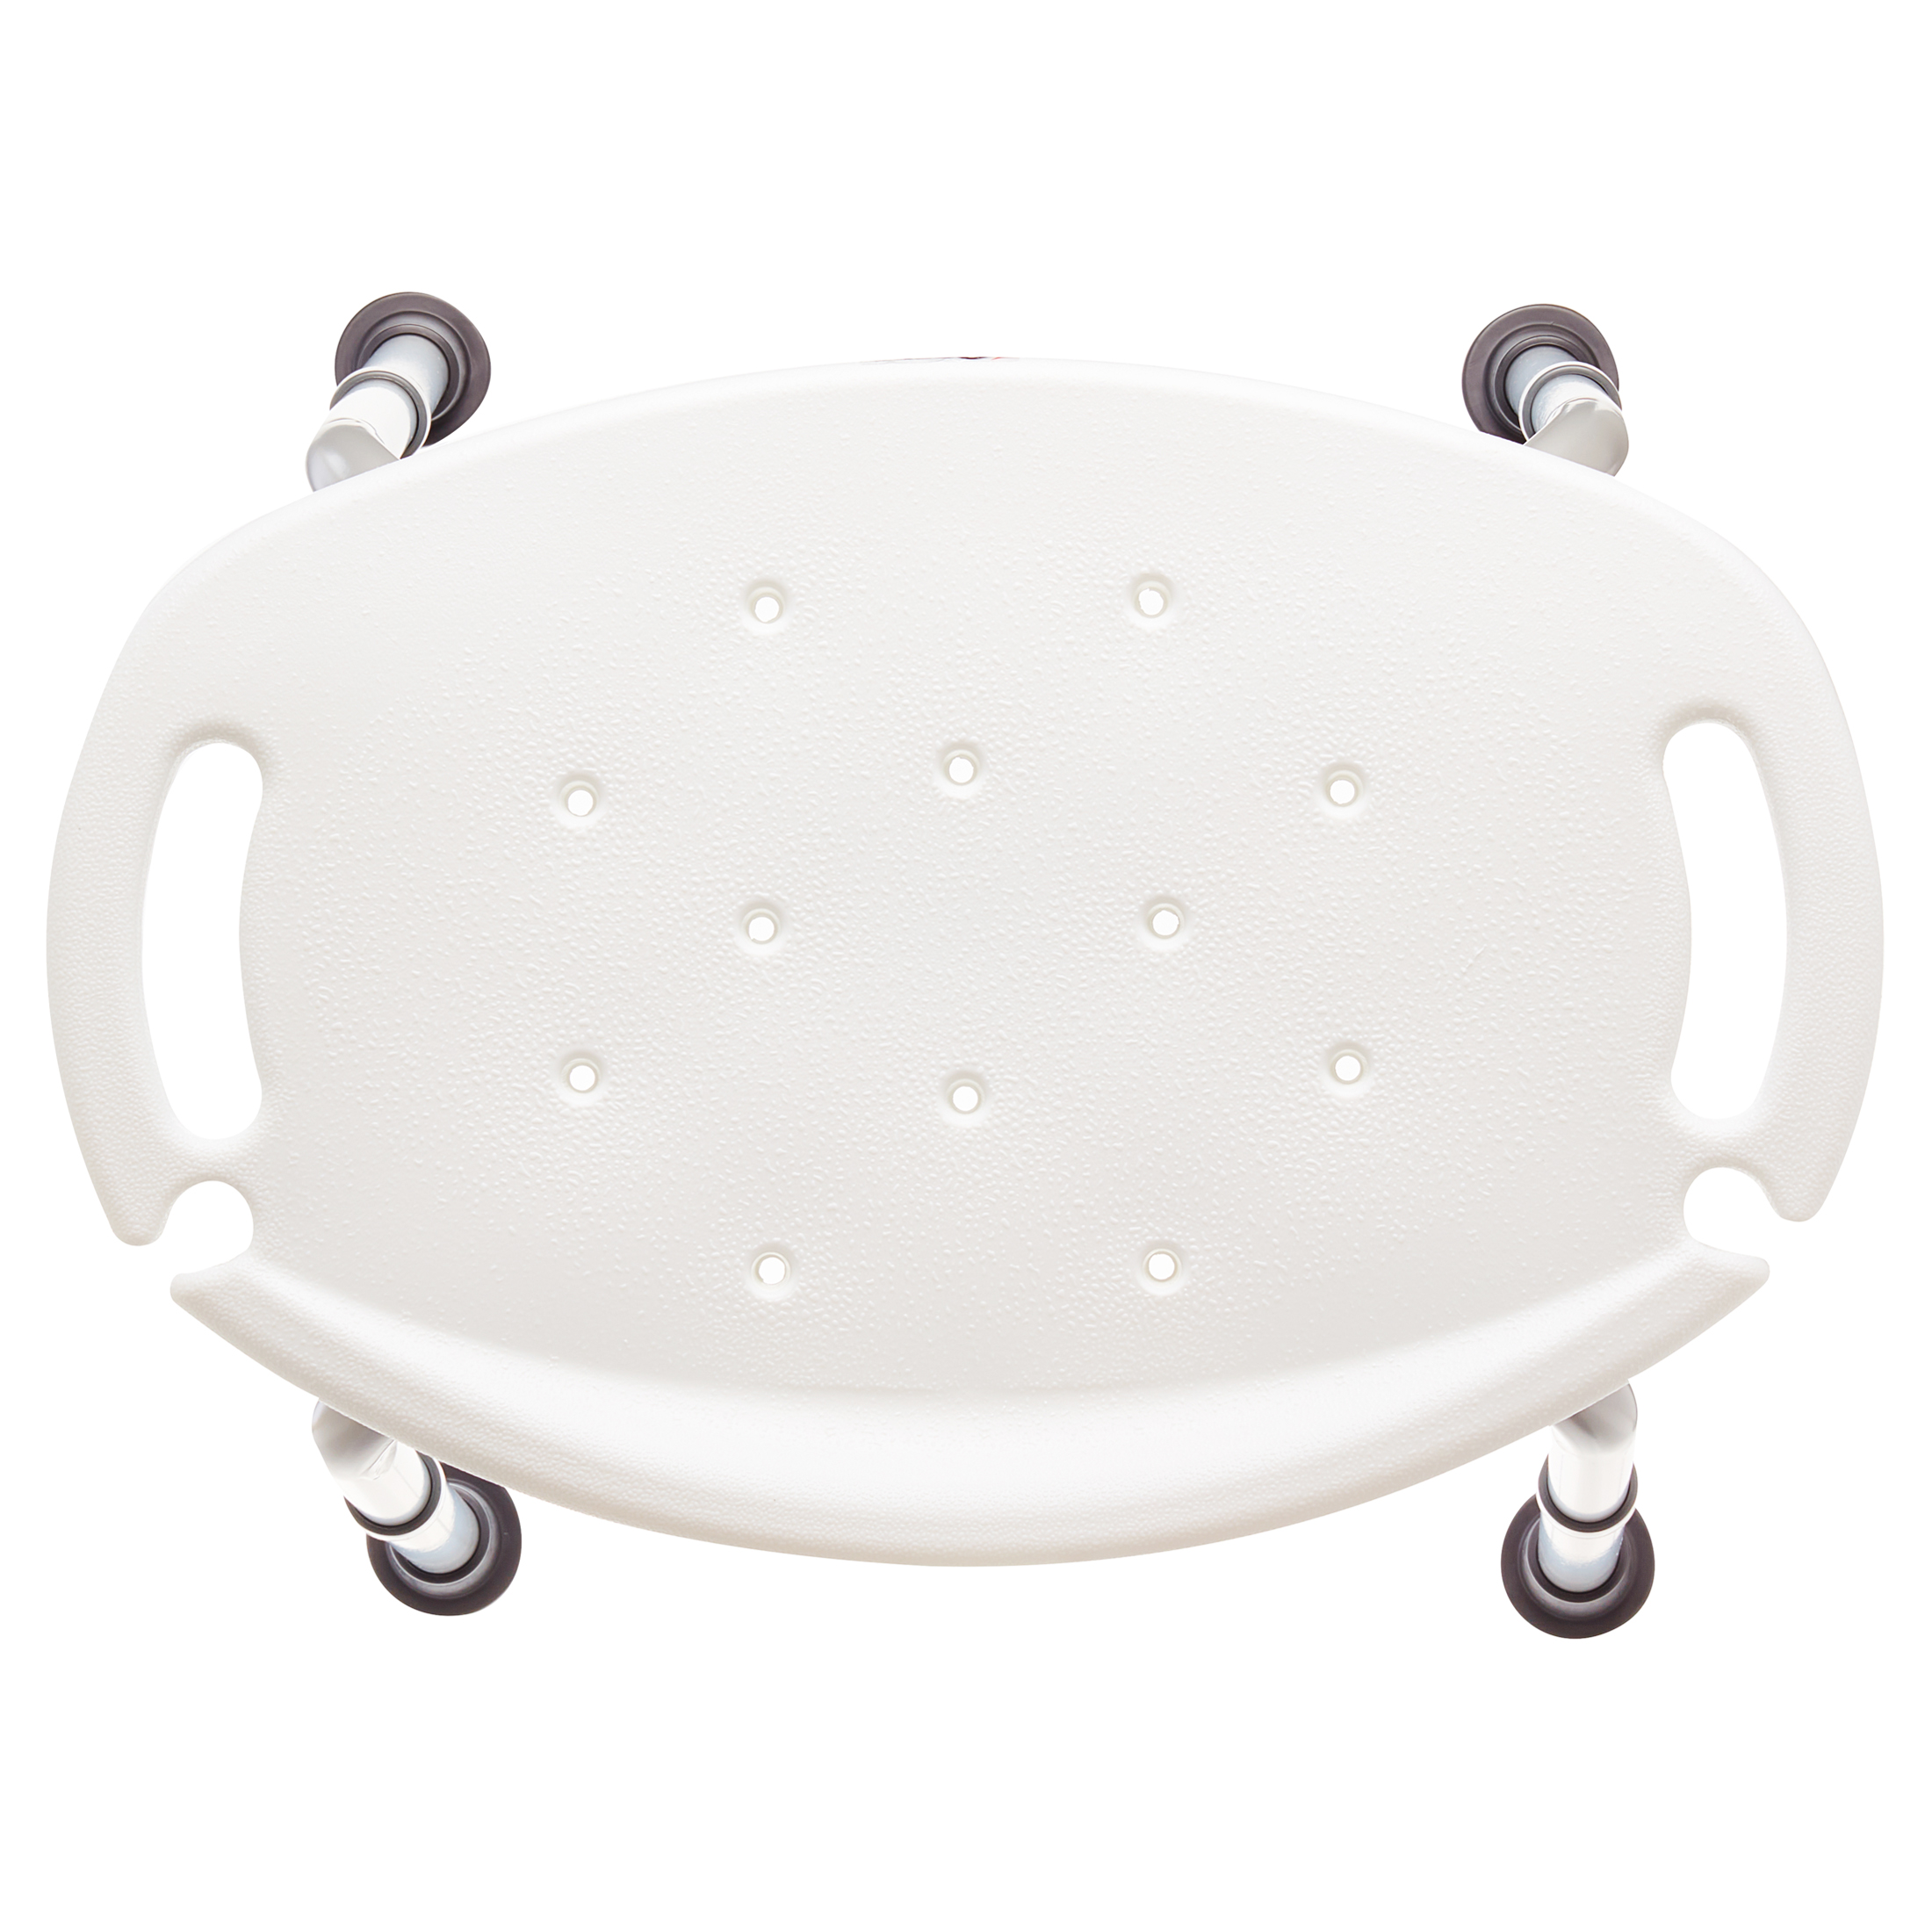 Carex Aluminium Bath and Shower Chair with Height Adjustable Legs, Built-in Notch, 300 lb Capacity - image 2 of 10